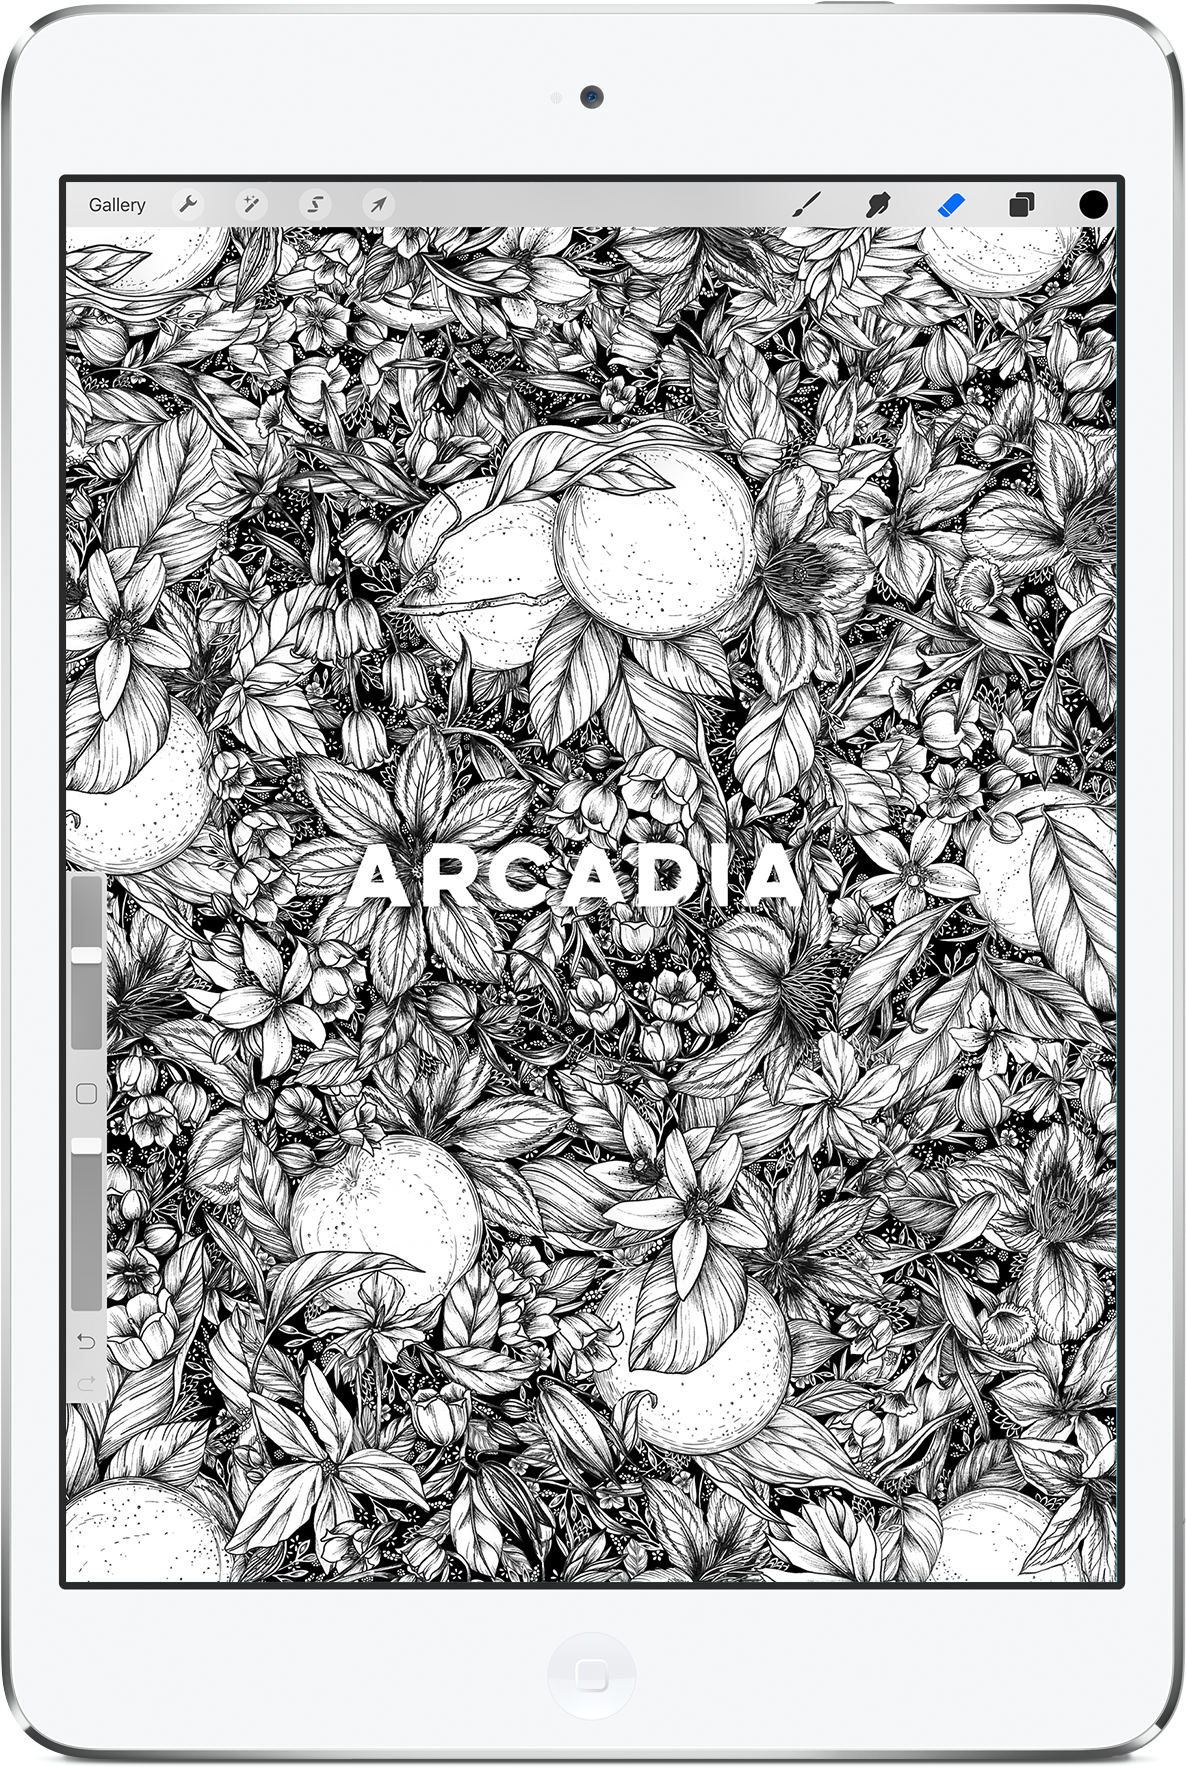 Packaging branding  surface design floral intricate black and white ILLUSTRATION  pattern design  typography   soap